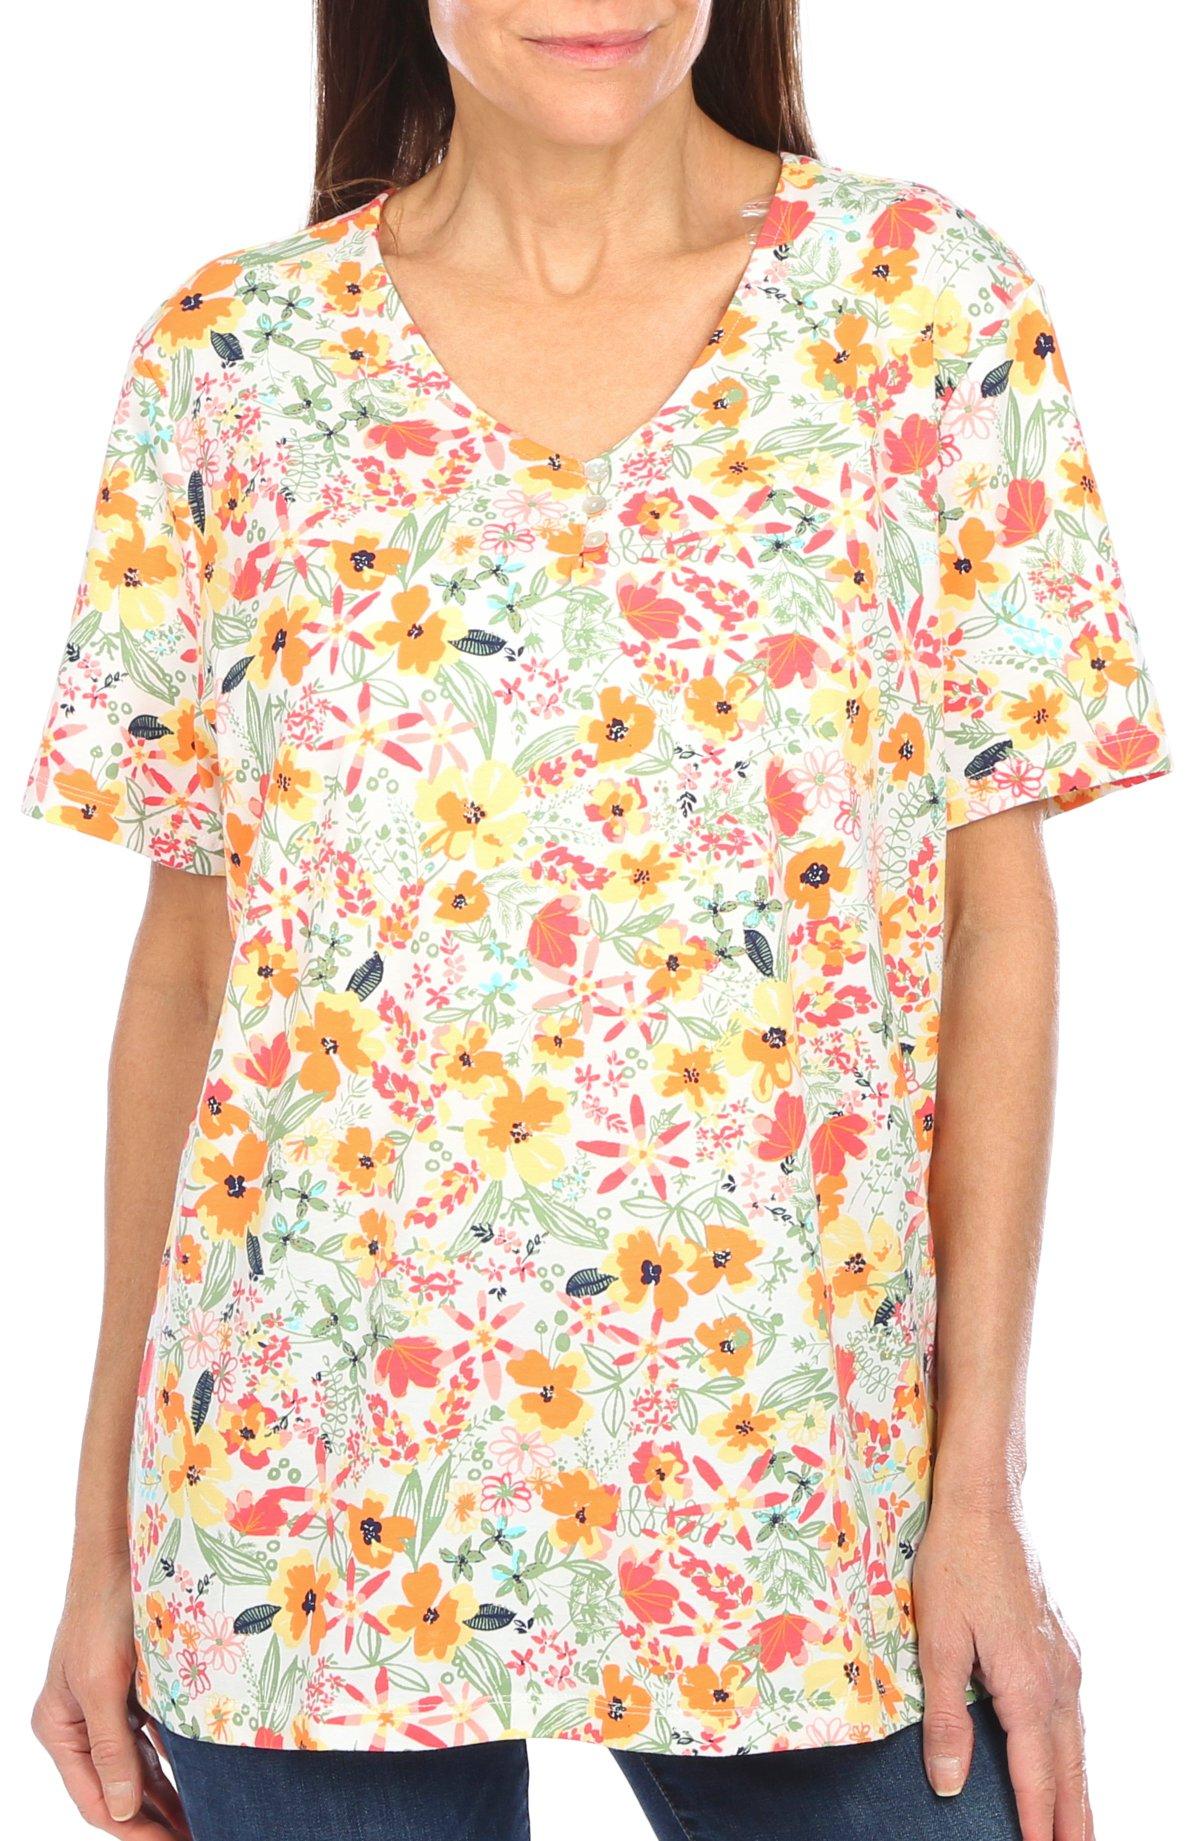 Coral Bay Womens Print Button Placket Short Sleeve Top